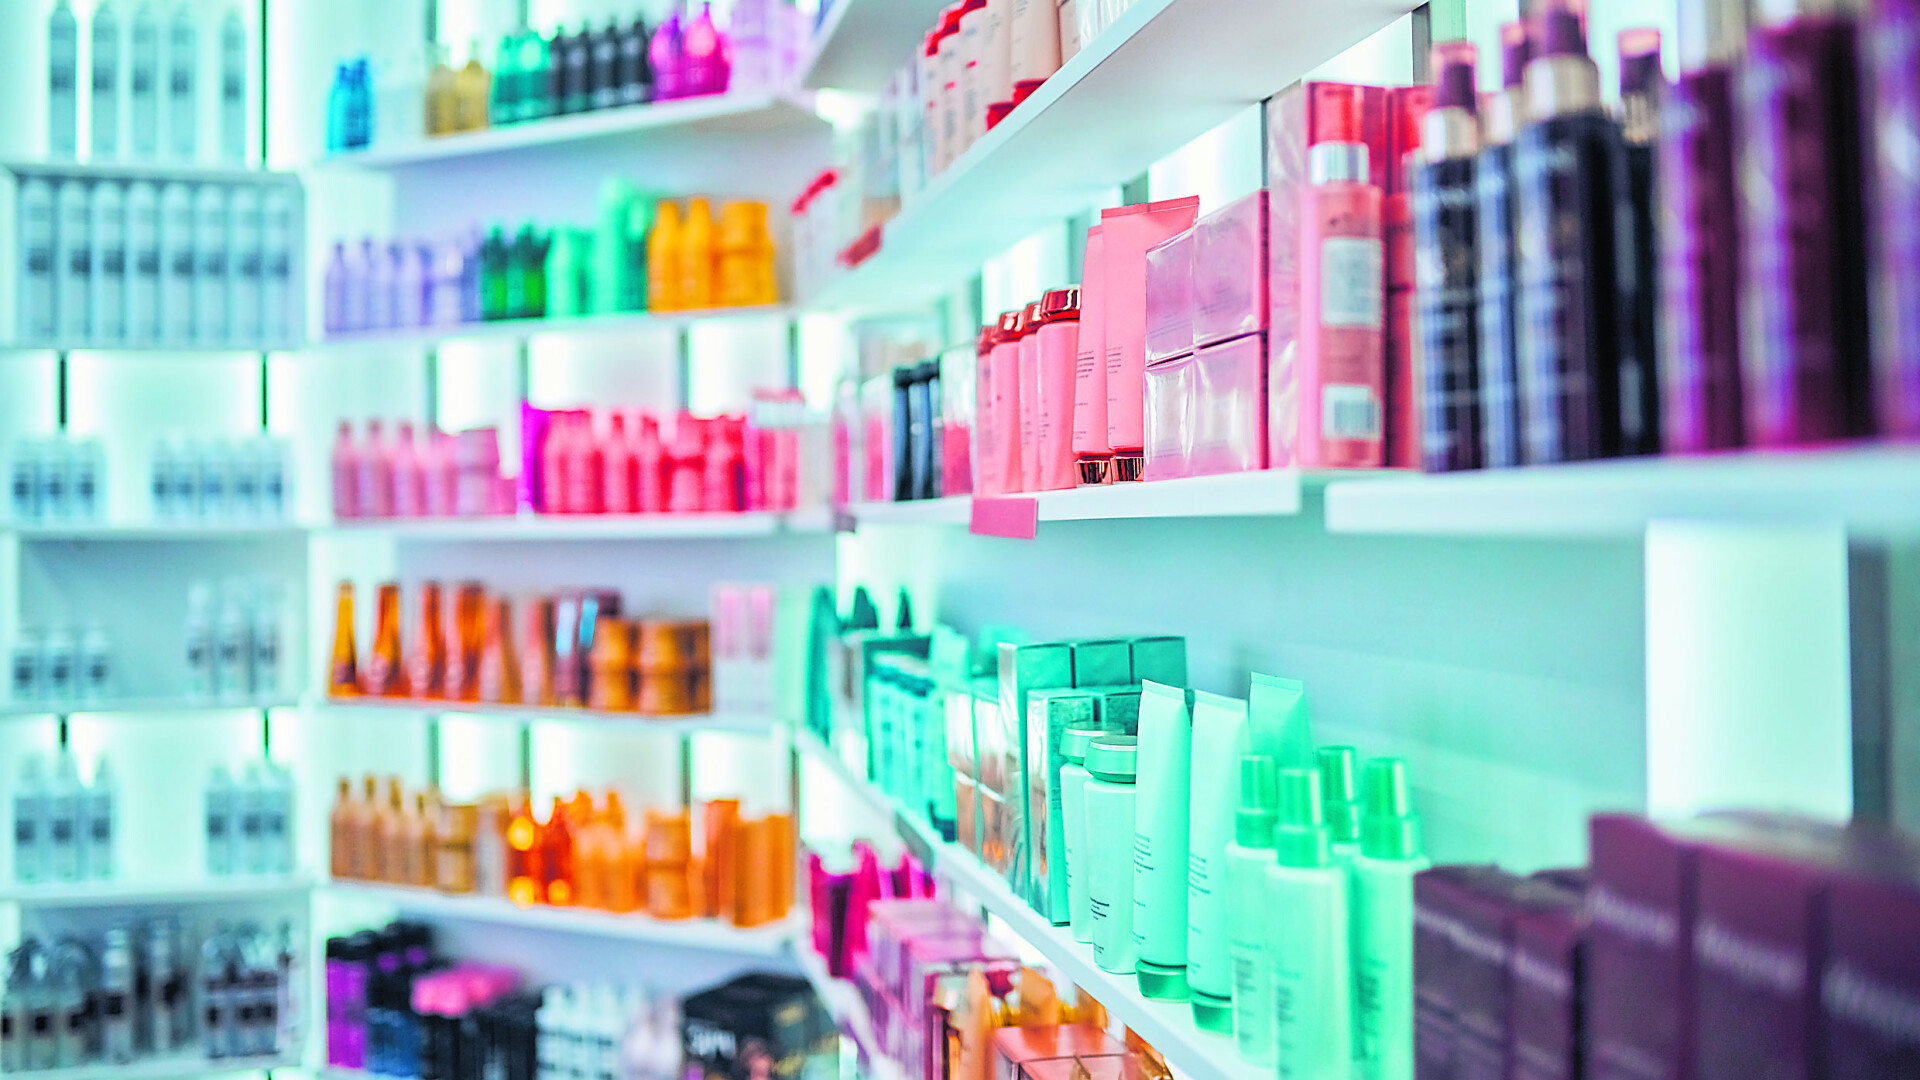 A question for science - why do so many cosmetics contain plastic?